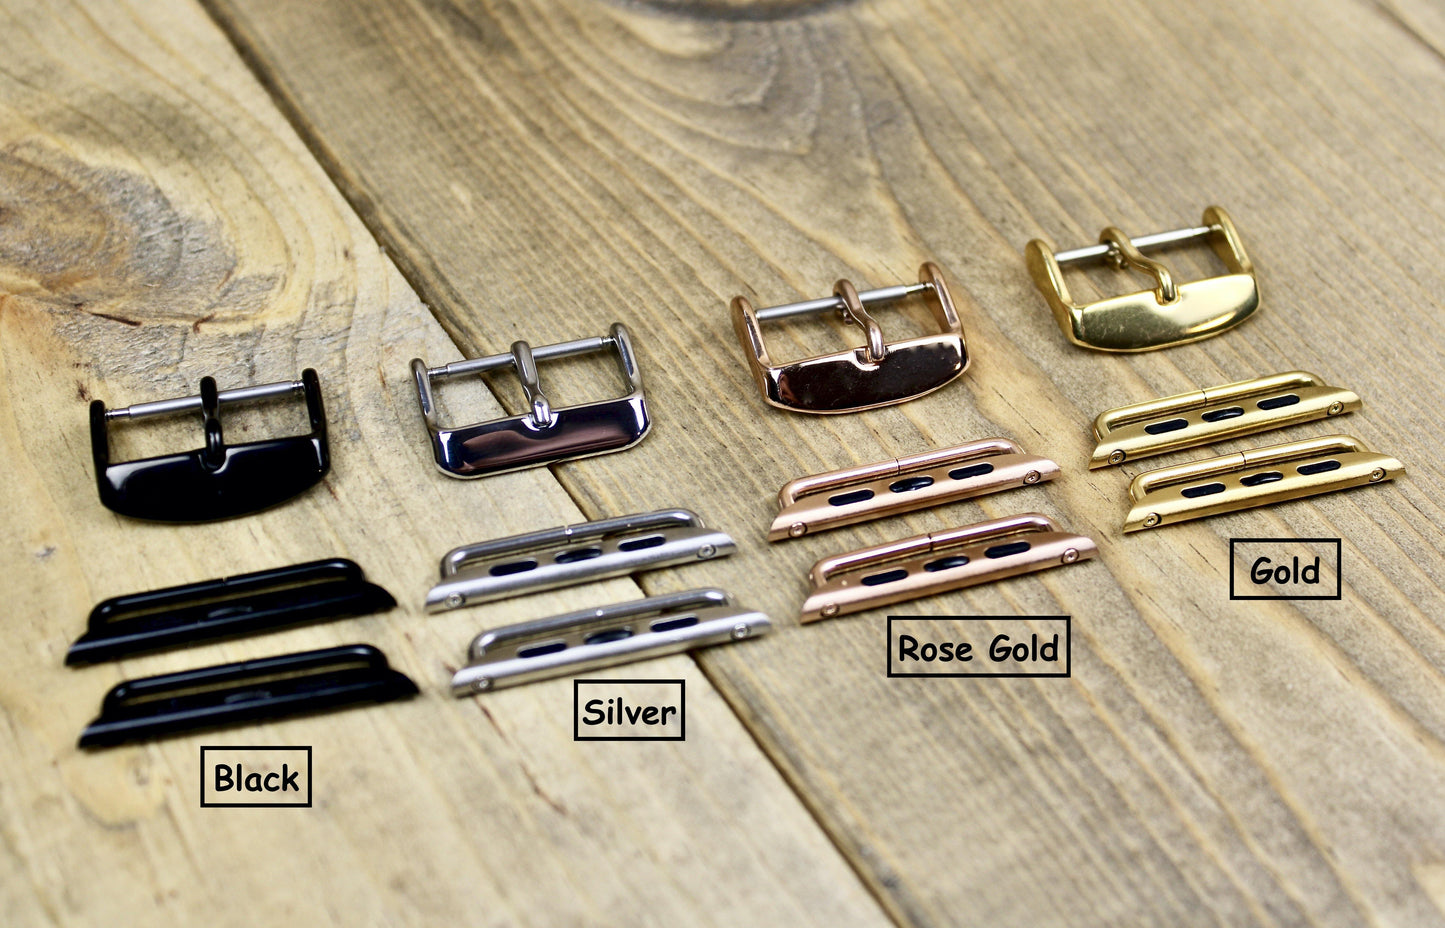 Black, Silver, Rose Gold, and Gold Apple Watch Adapters